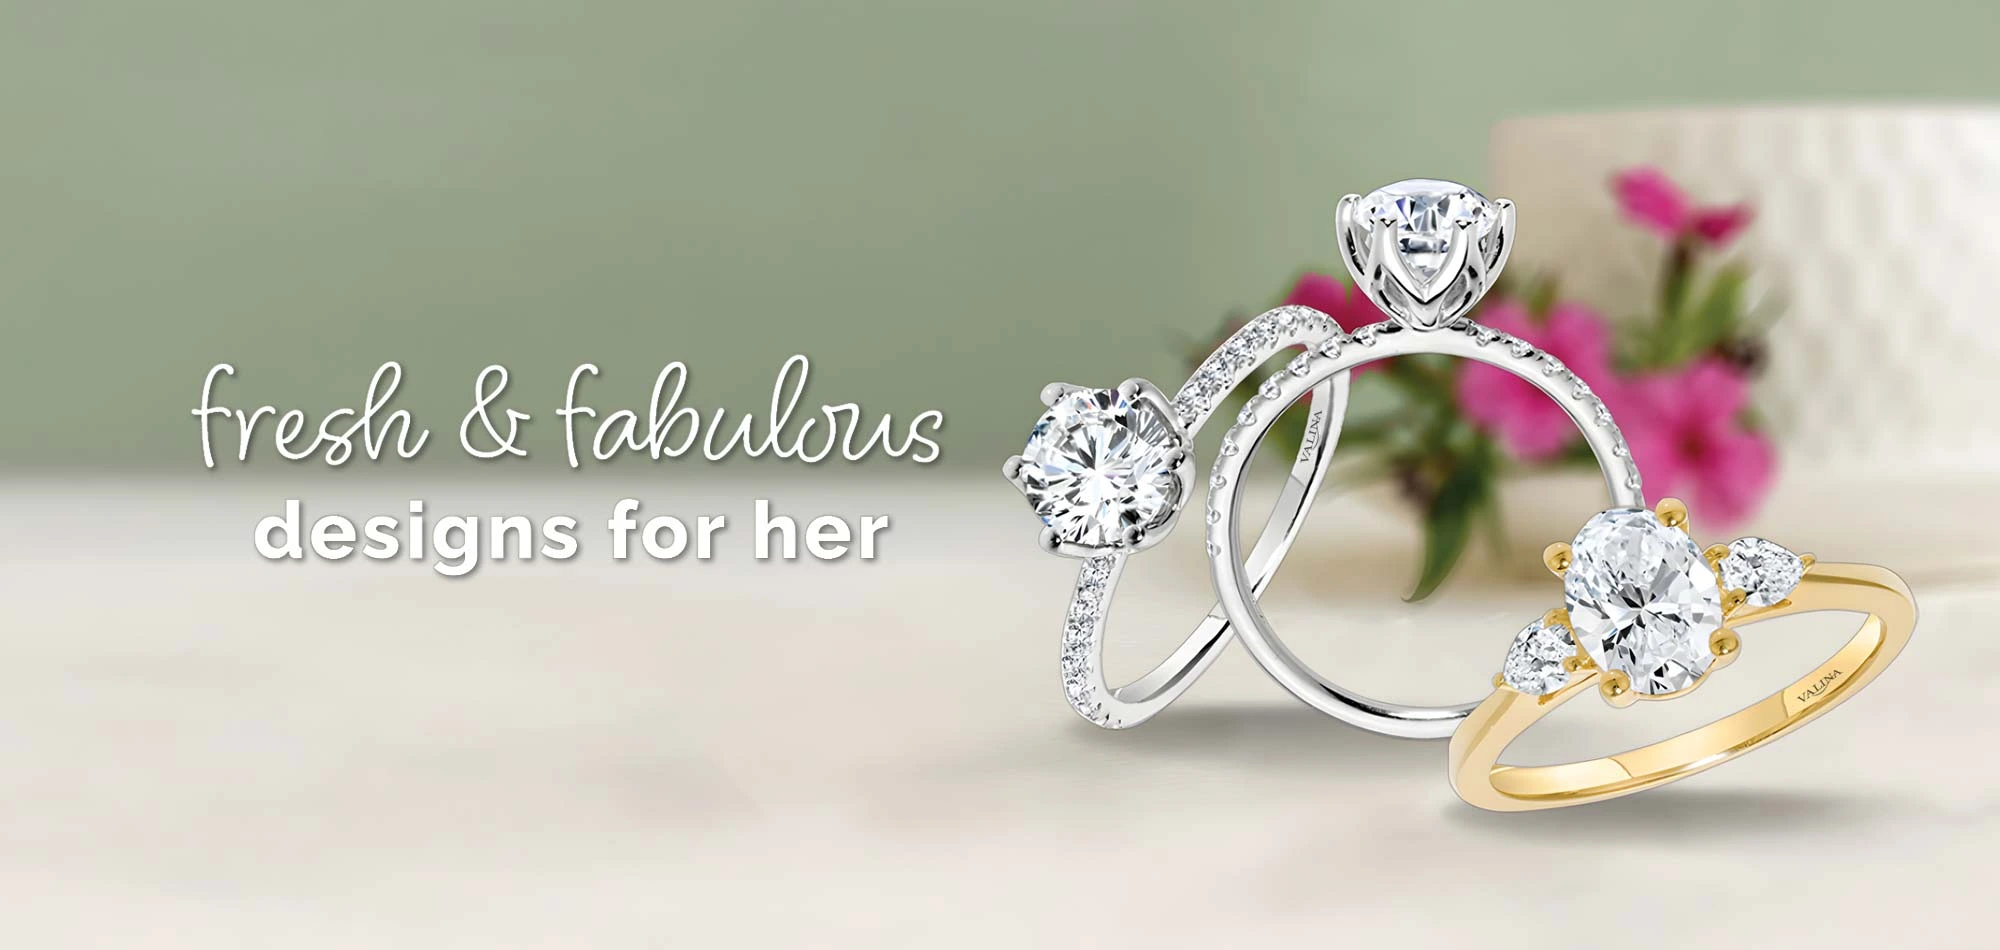 June Fabulous Collection At M And M Jewelers